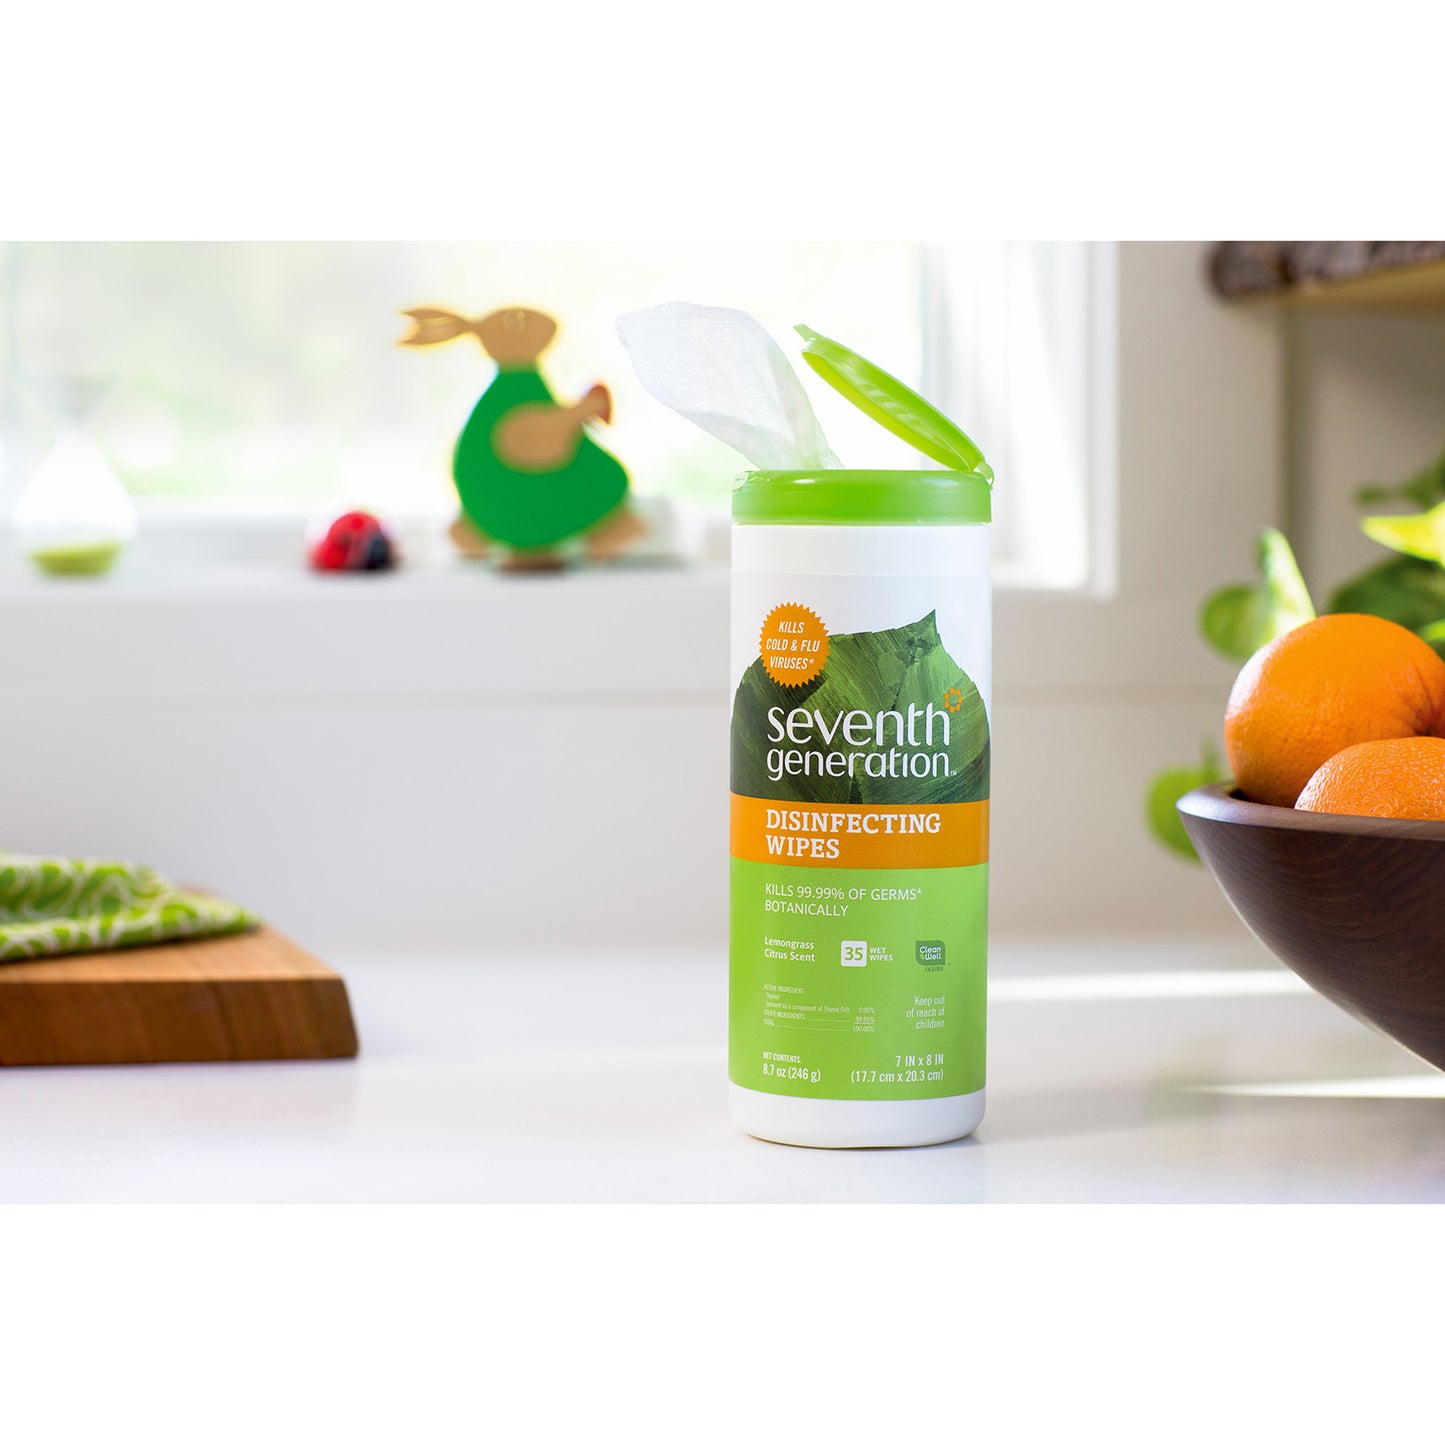 Seventh Generation Botanical Disinfecting Wipes Lemongrass Citrus 1-Ply White 35 Wipes 22812